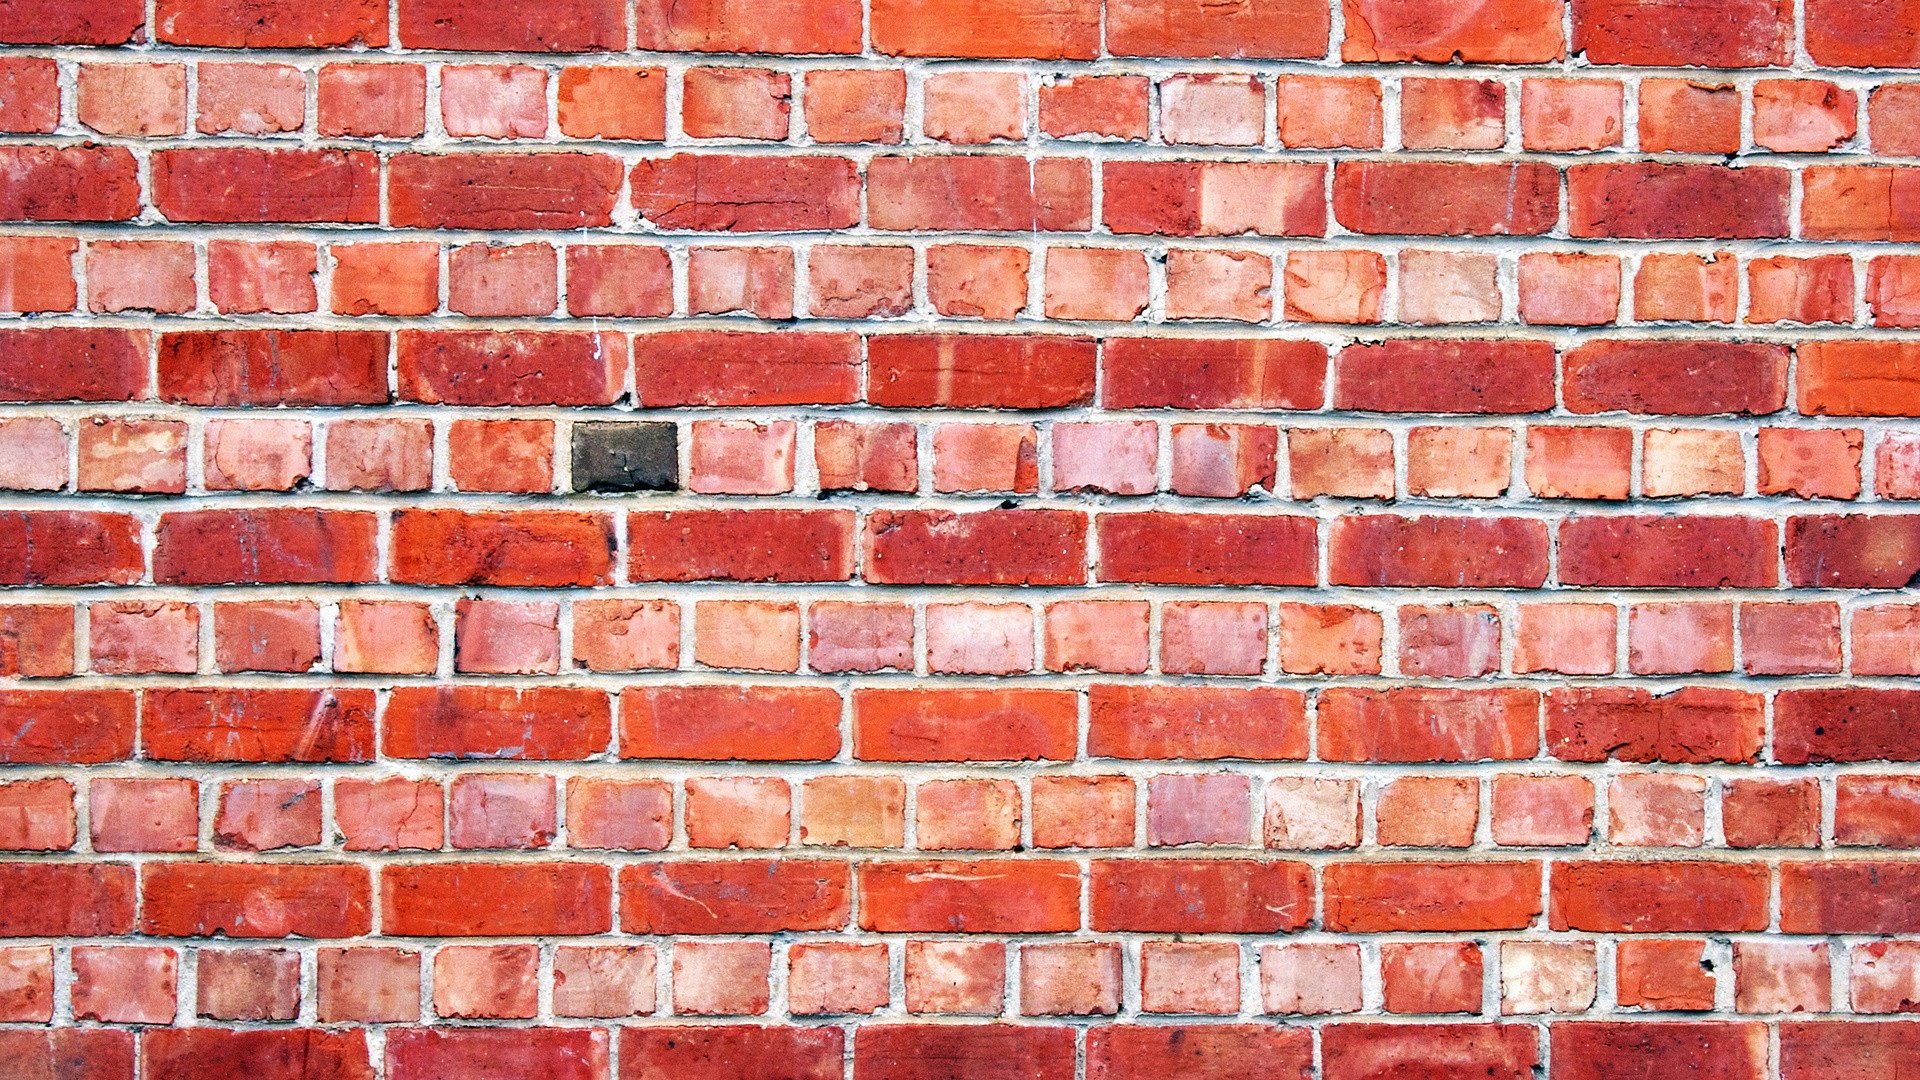 Brick Desktop Backgrounds HD with high-resolution 1920x1080 pixel. You can use this wallpaper for your Windows and Mac OS computers as well as your Android and iPhone smartphones